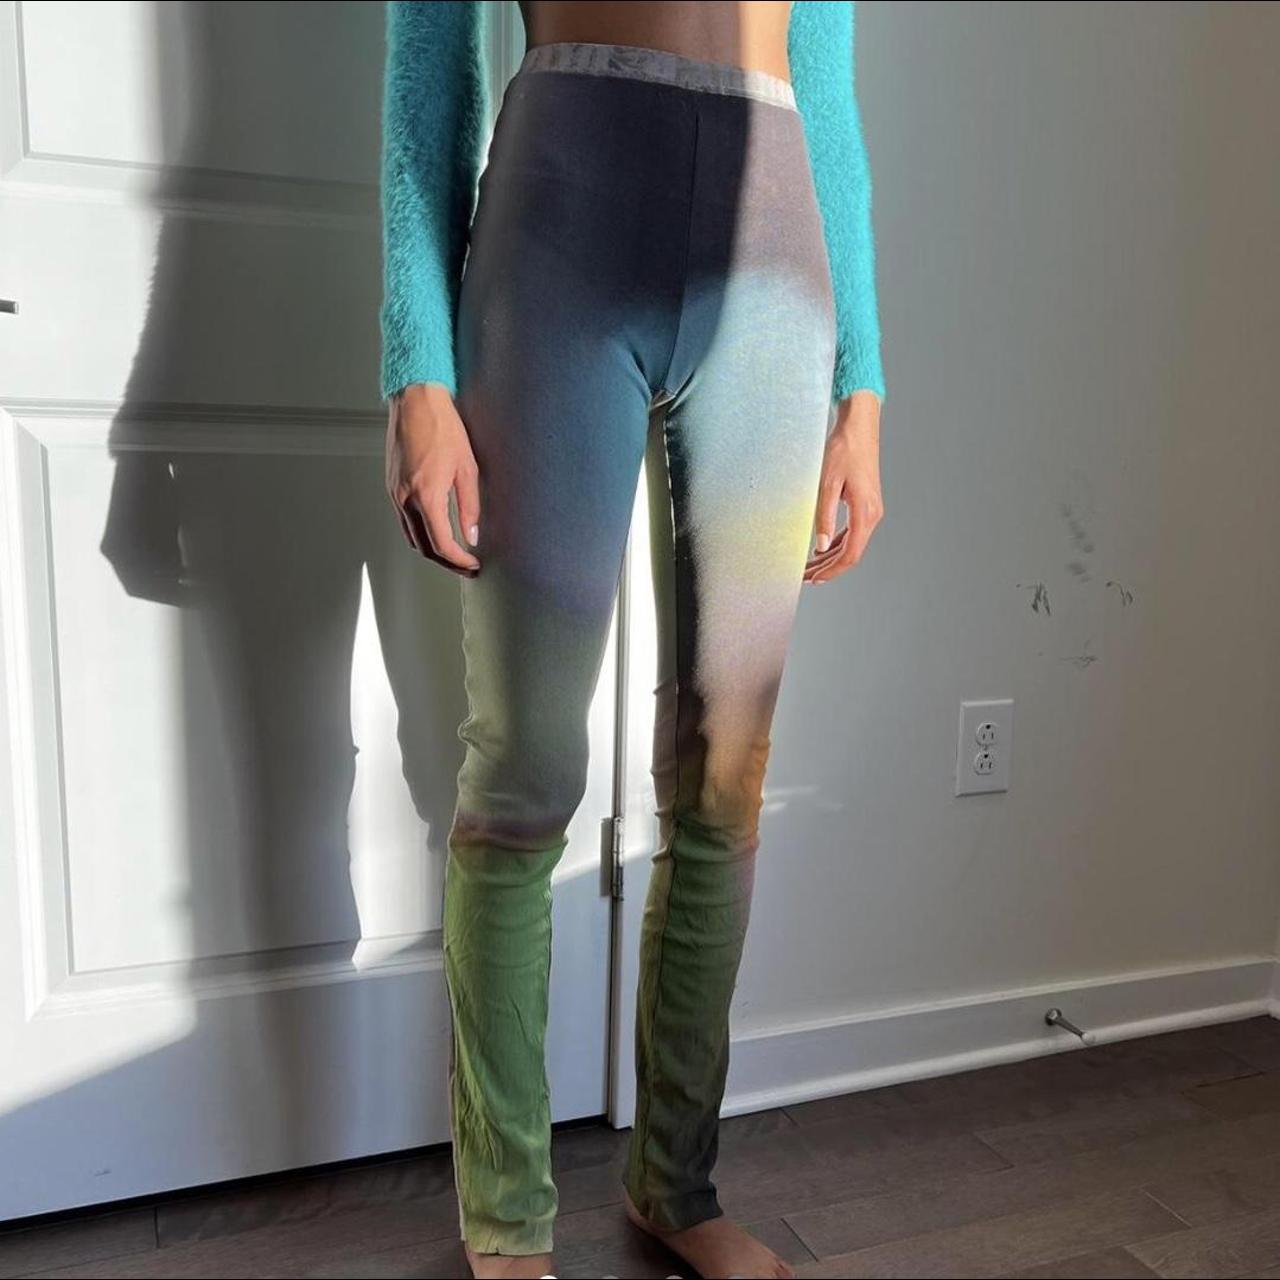 Product Image 1 - Ottolinger tights size XS/S. Has